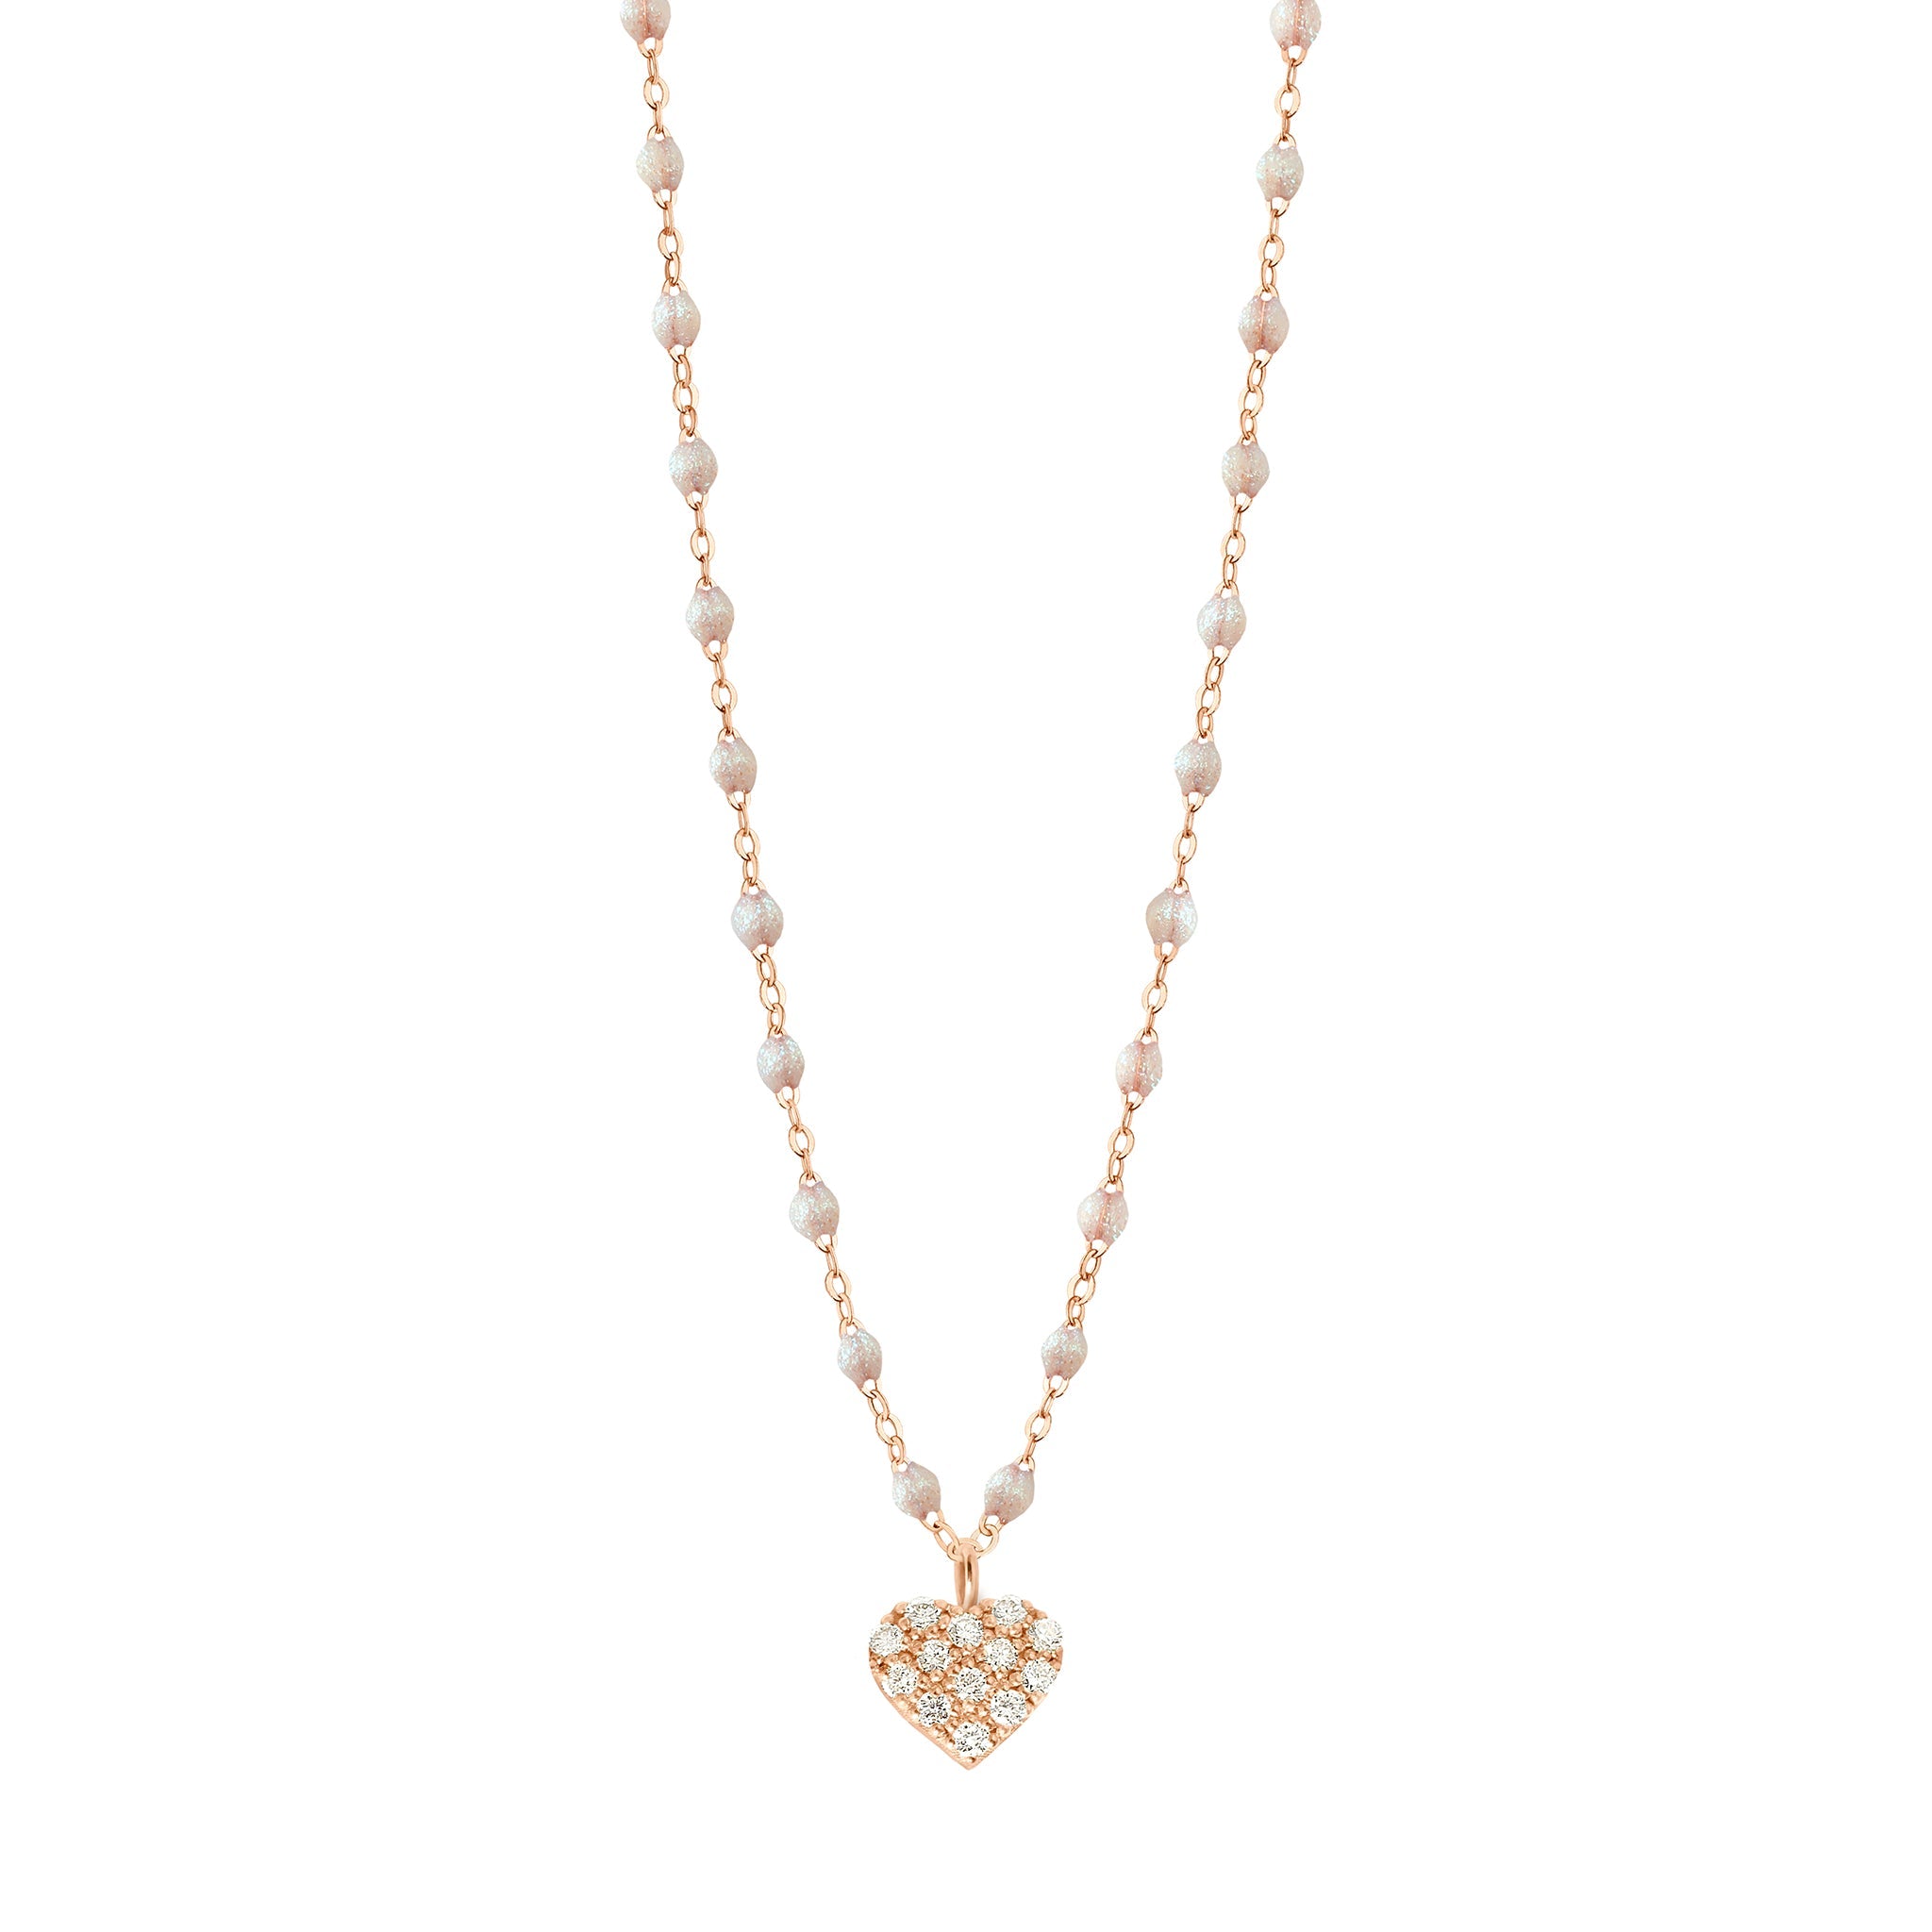 Collier opale In Love, diamants, or rose, 42 cm in love Référence :  b1il001r6142di -1